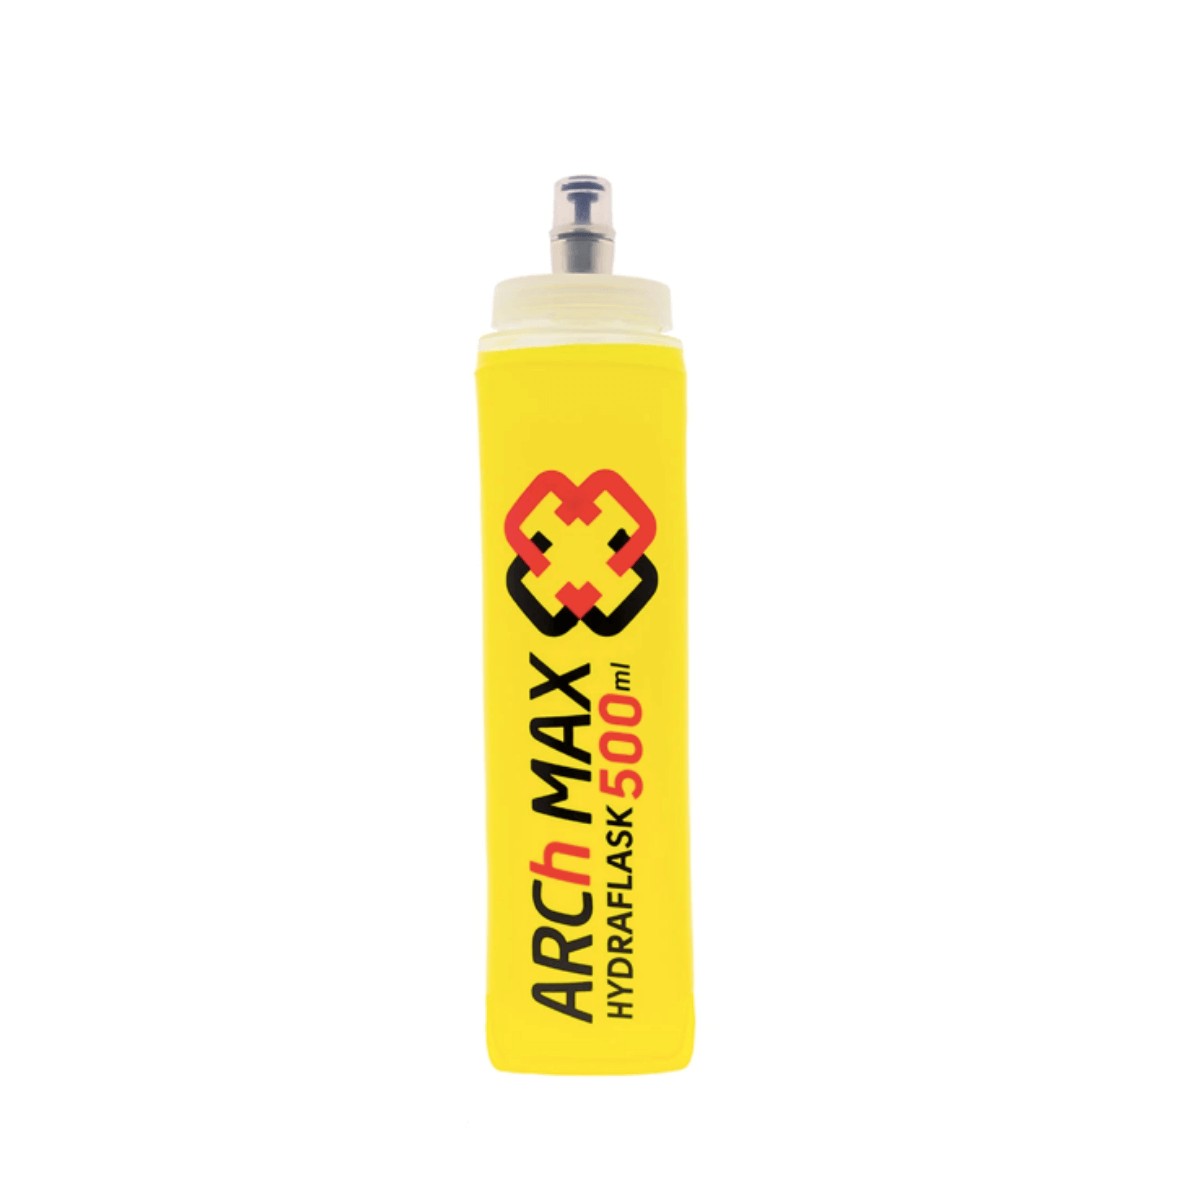 Arch Max soft flask 500 ml yellow bottle